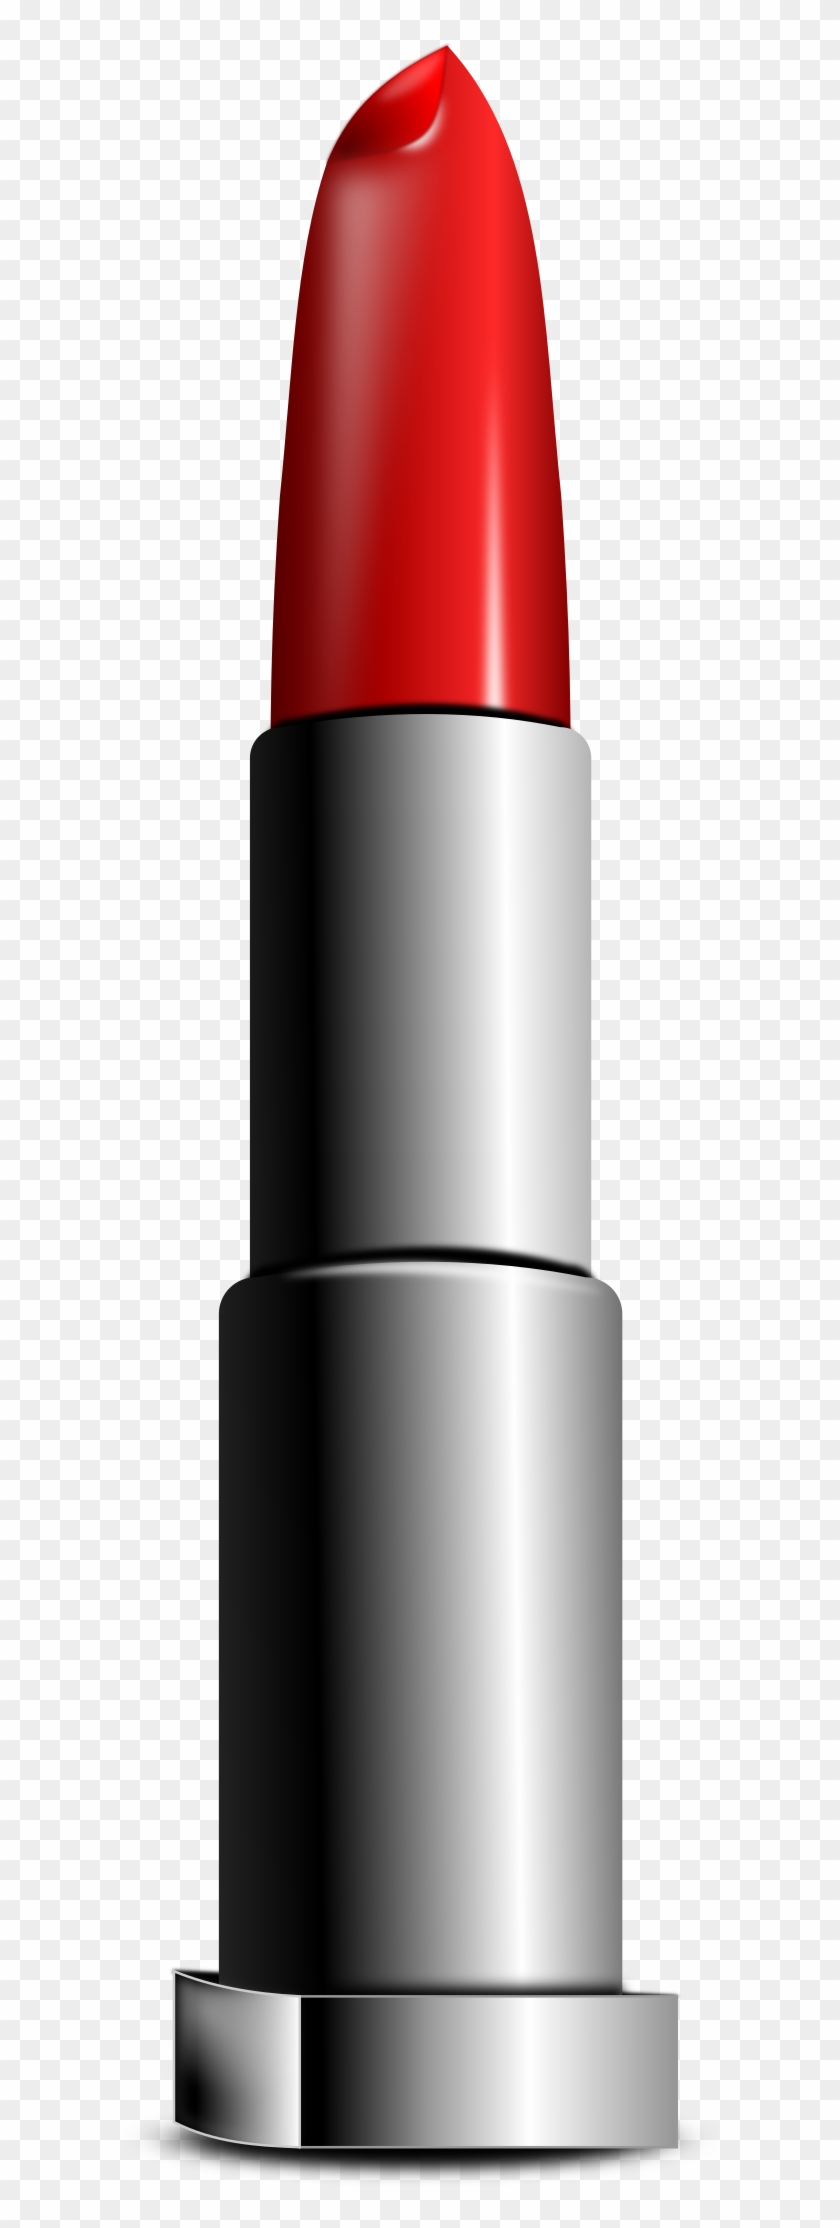 Pictures Of Lipstick - Red Lipstick Clip Art #201672